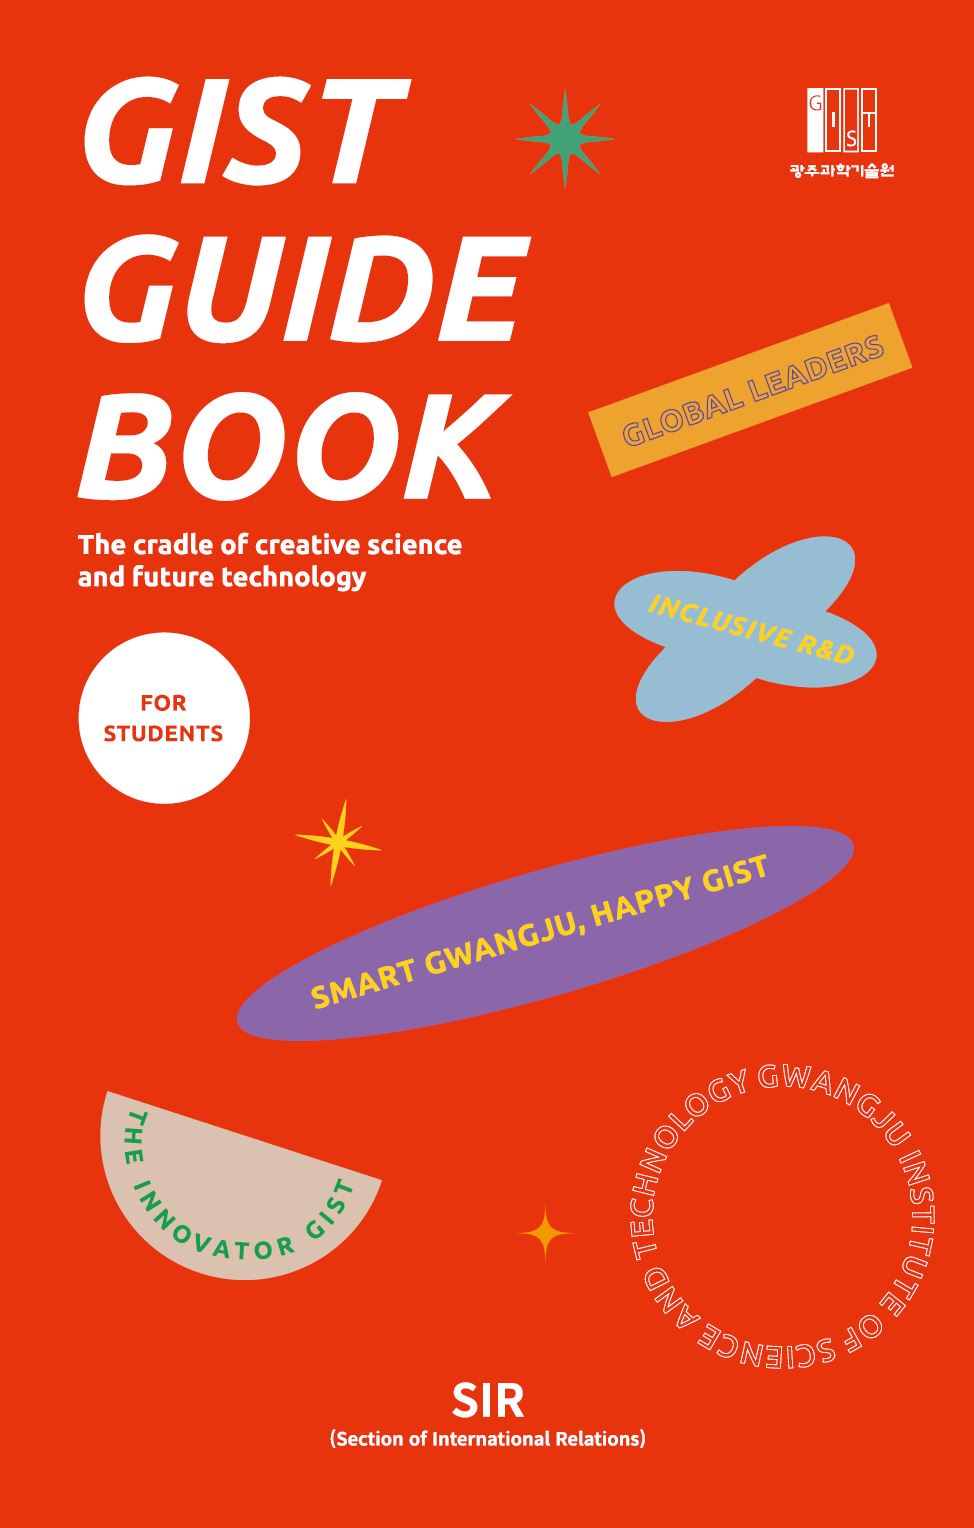 2022 Guidebook for Students 이미지